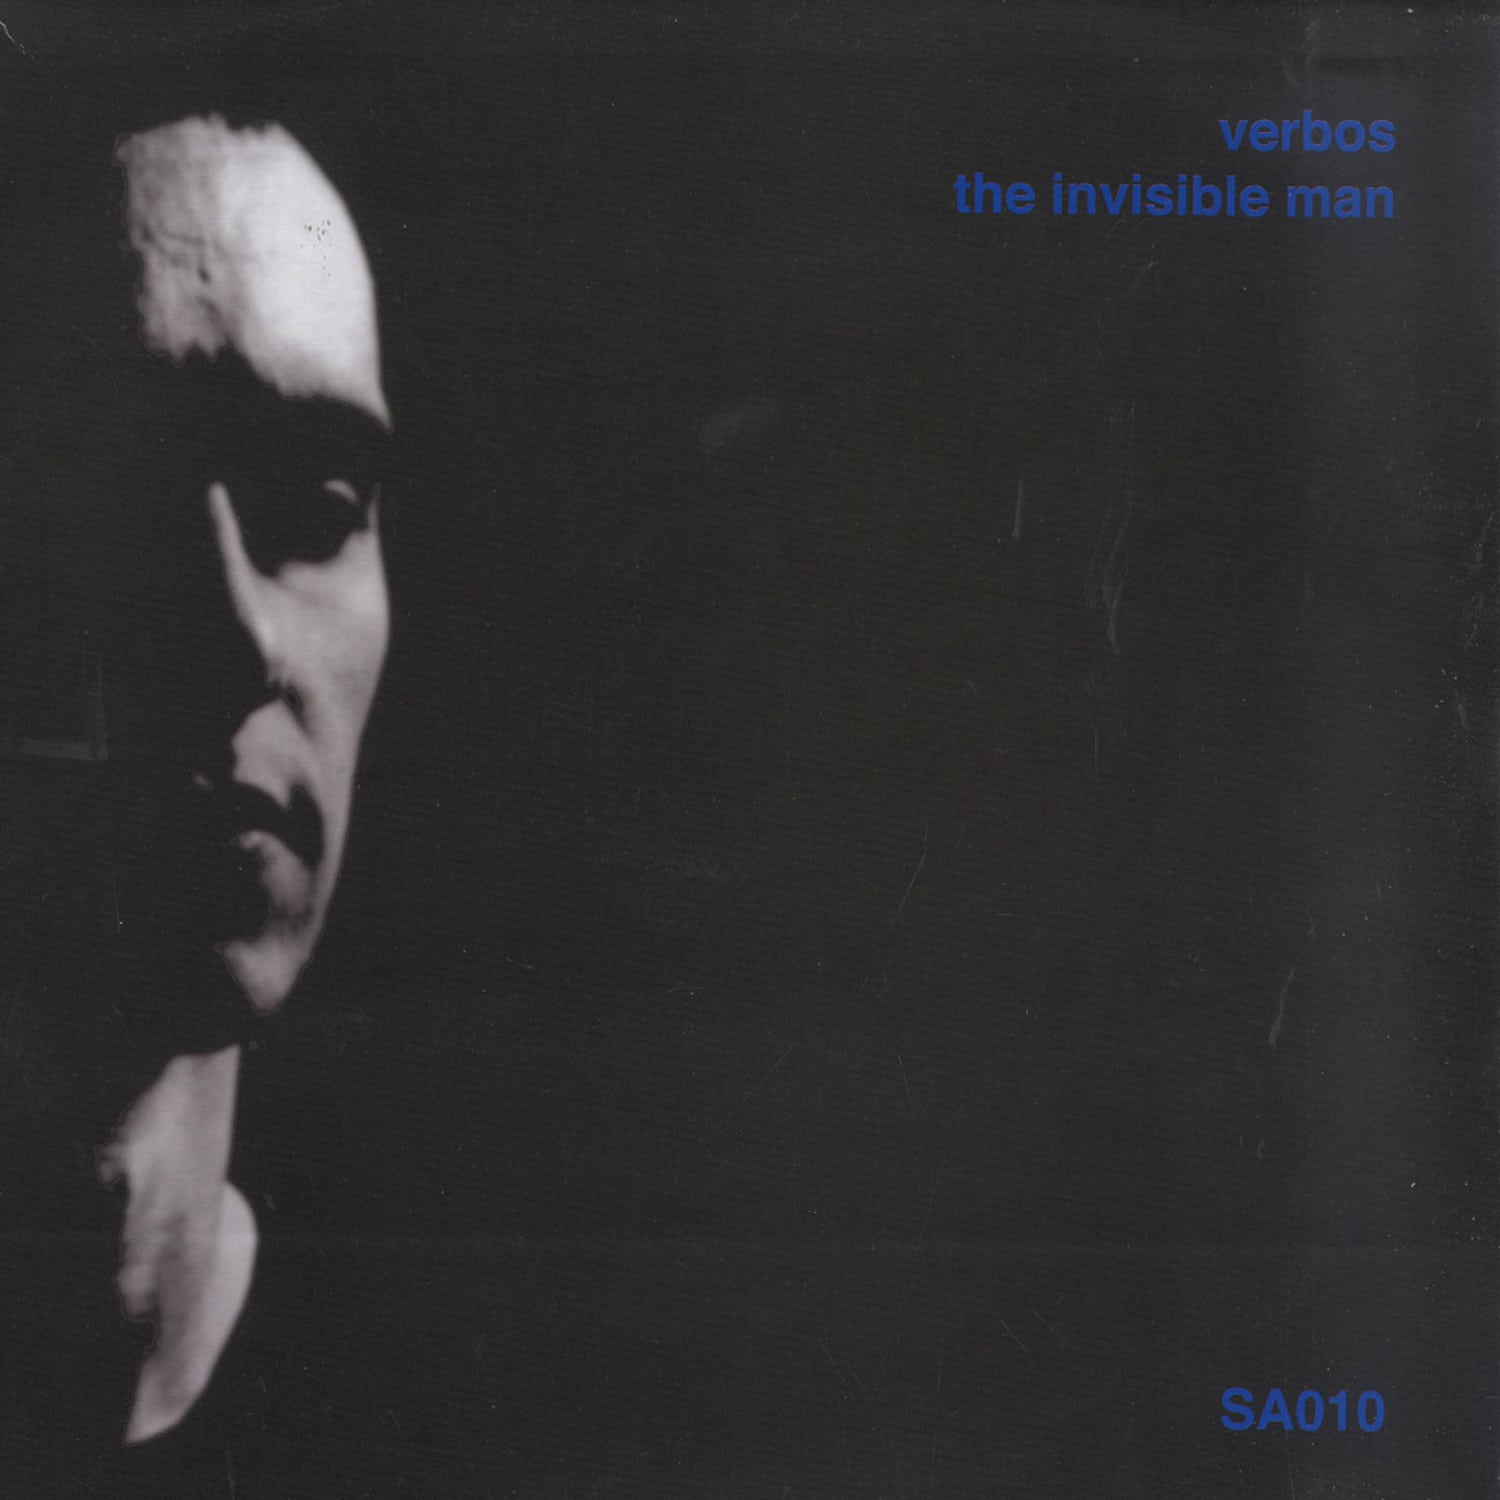 Verbos - THE INVISIBLE MAN 